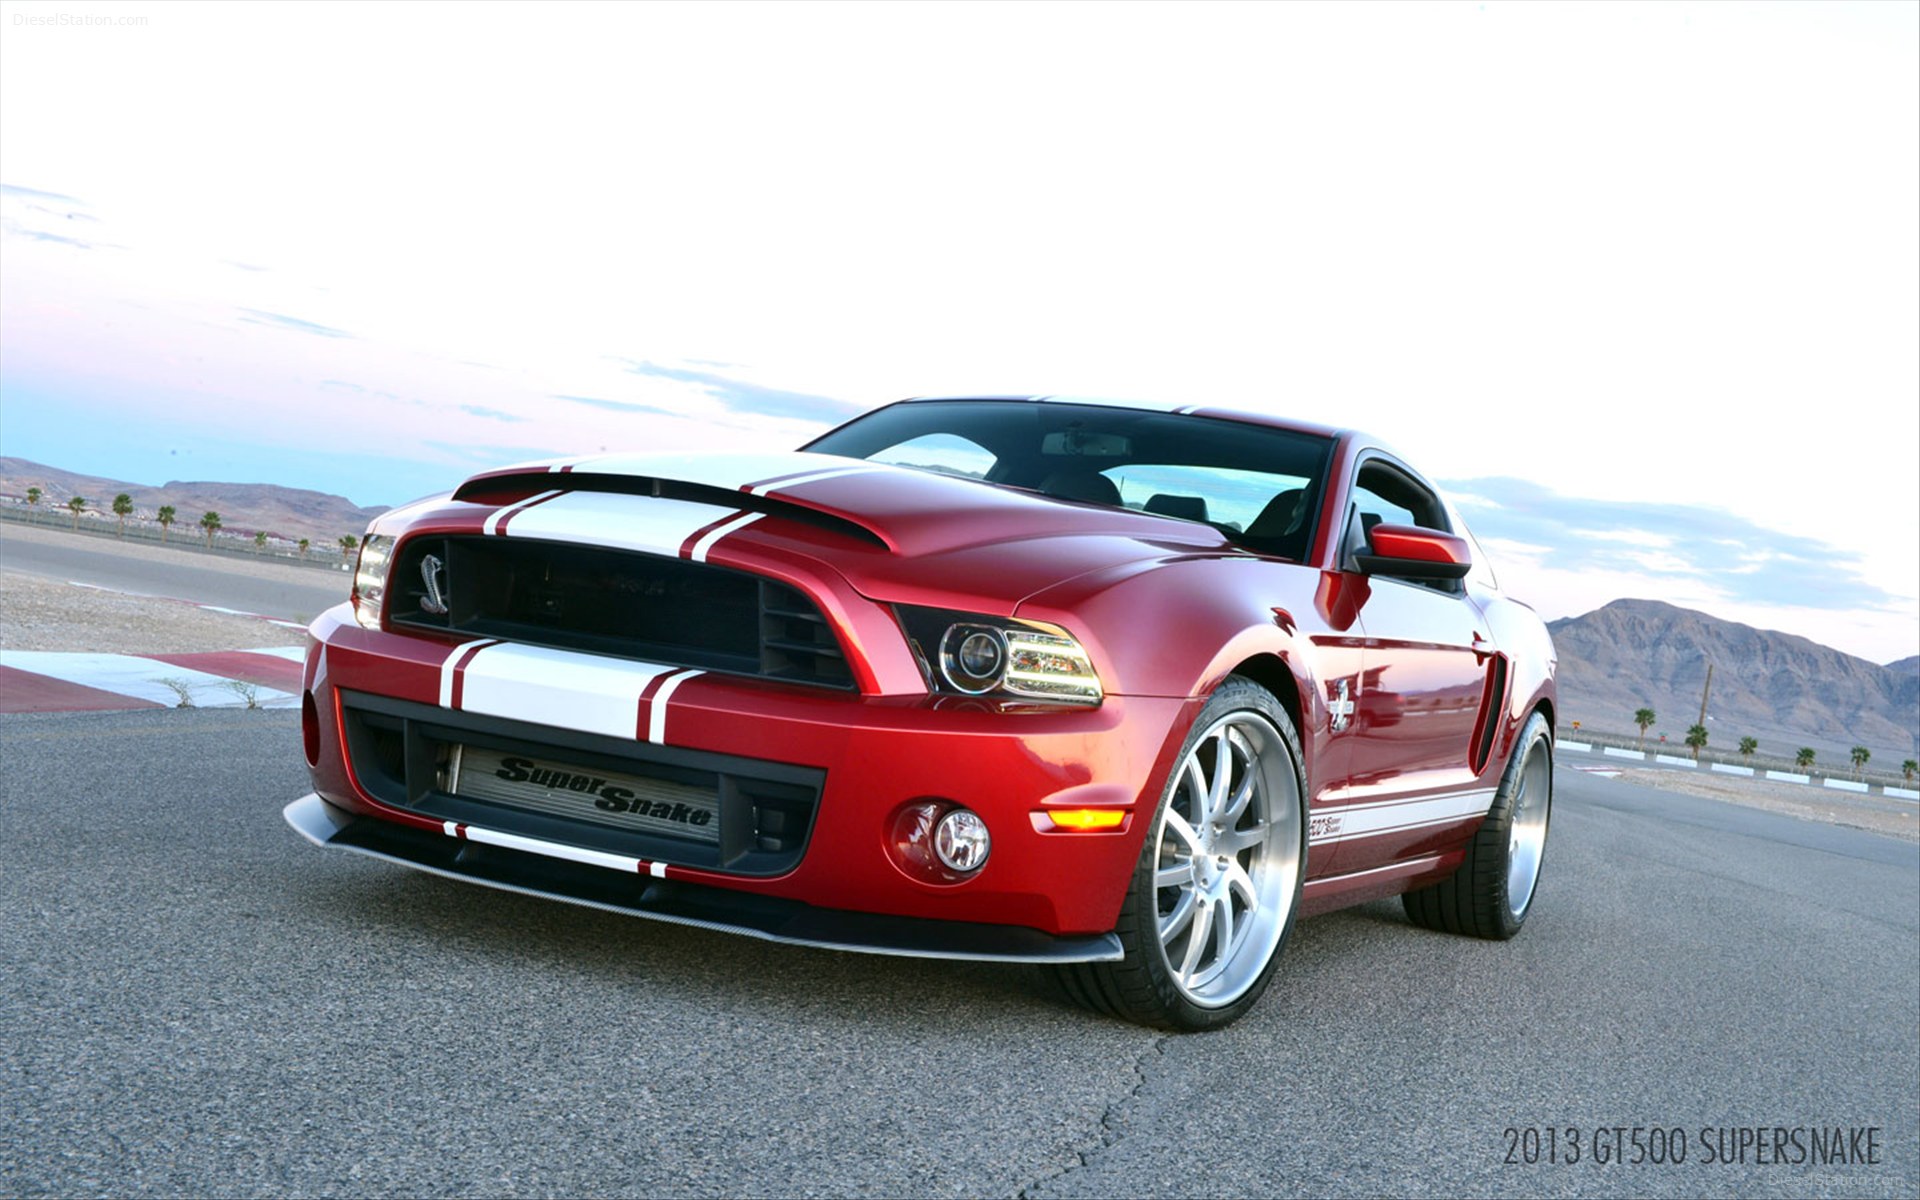 Shelby American Gt500 Super Snake - Galpin Auto Sports Shelby Gt500 Super Snake - HD Wallpaper 